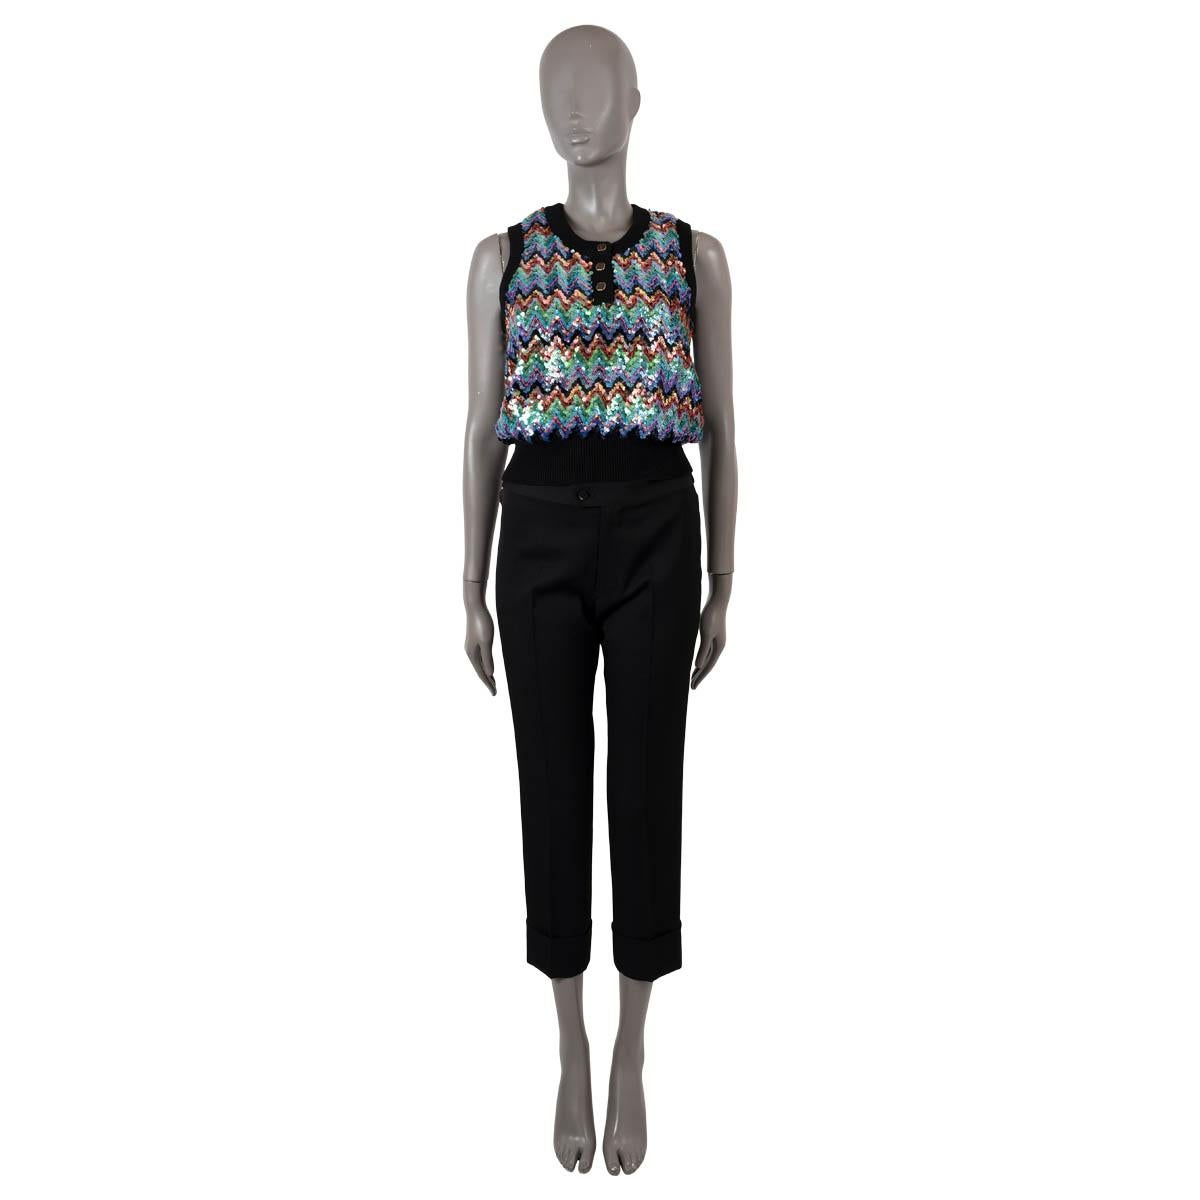 100% authentic Louis Vuitton zigzag sweater vest in black wool (93%), polyamide (6%) and elastane (1%) and multicolor sequins. Features a henley scoop neck, rib knit neck, armholes and hem. Lined in silk (with 9% elastane). Has been worn and is in